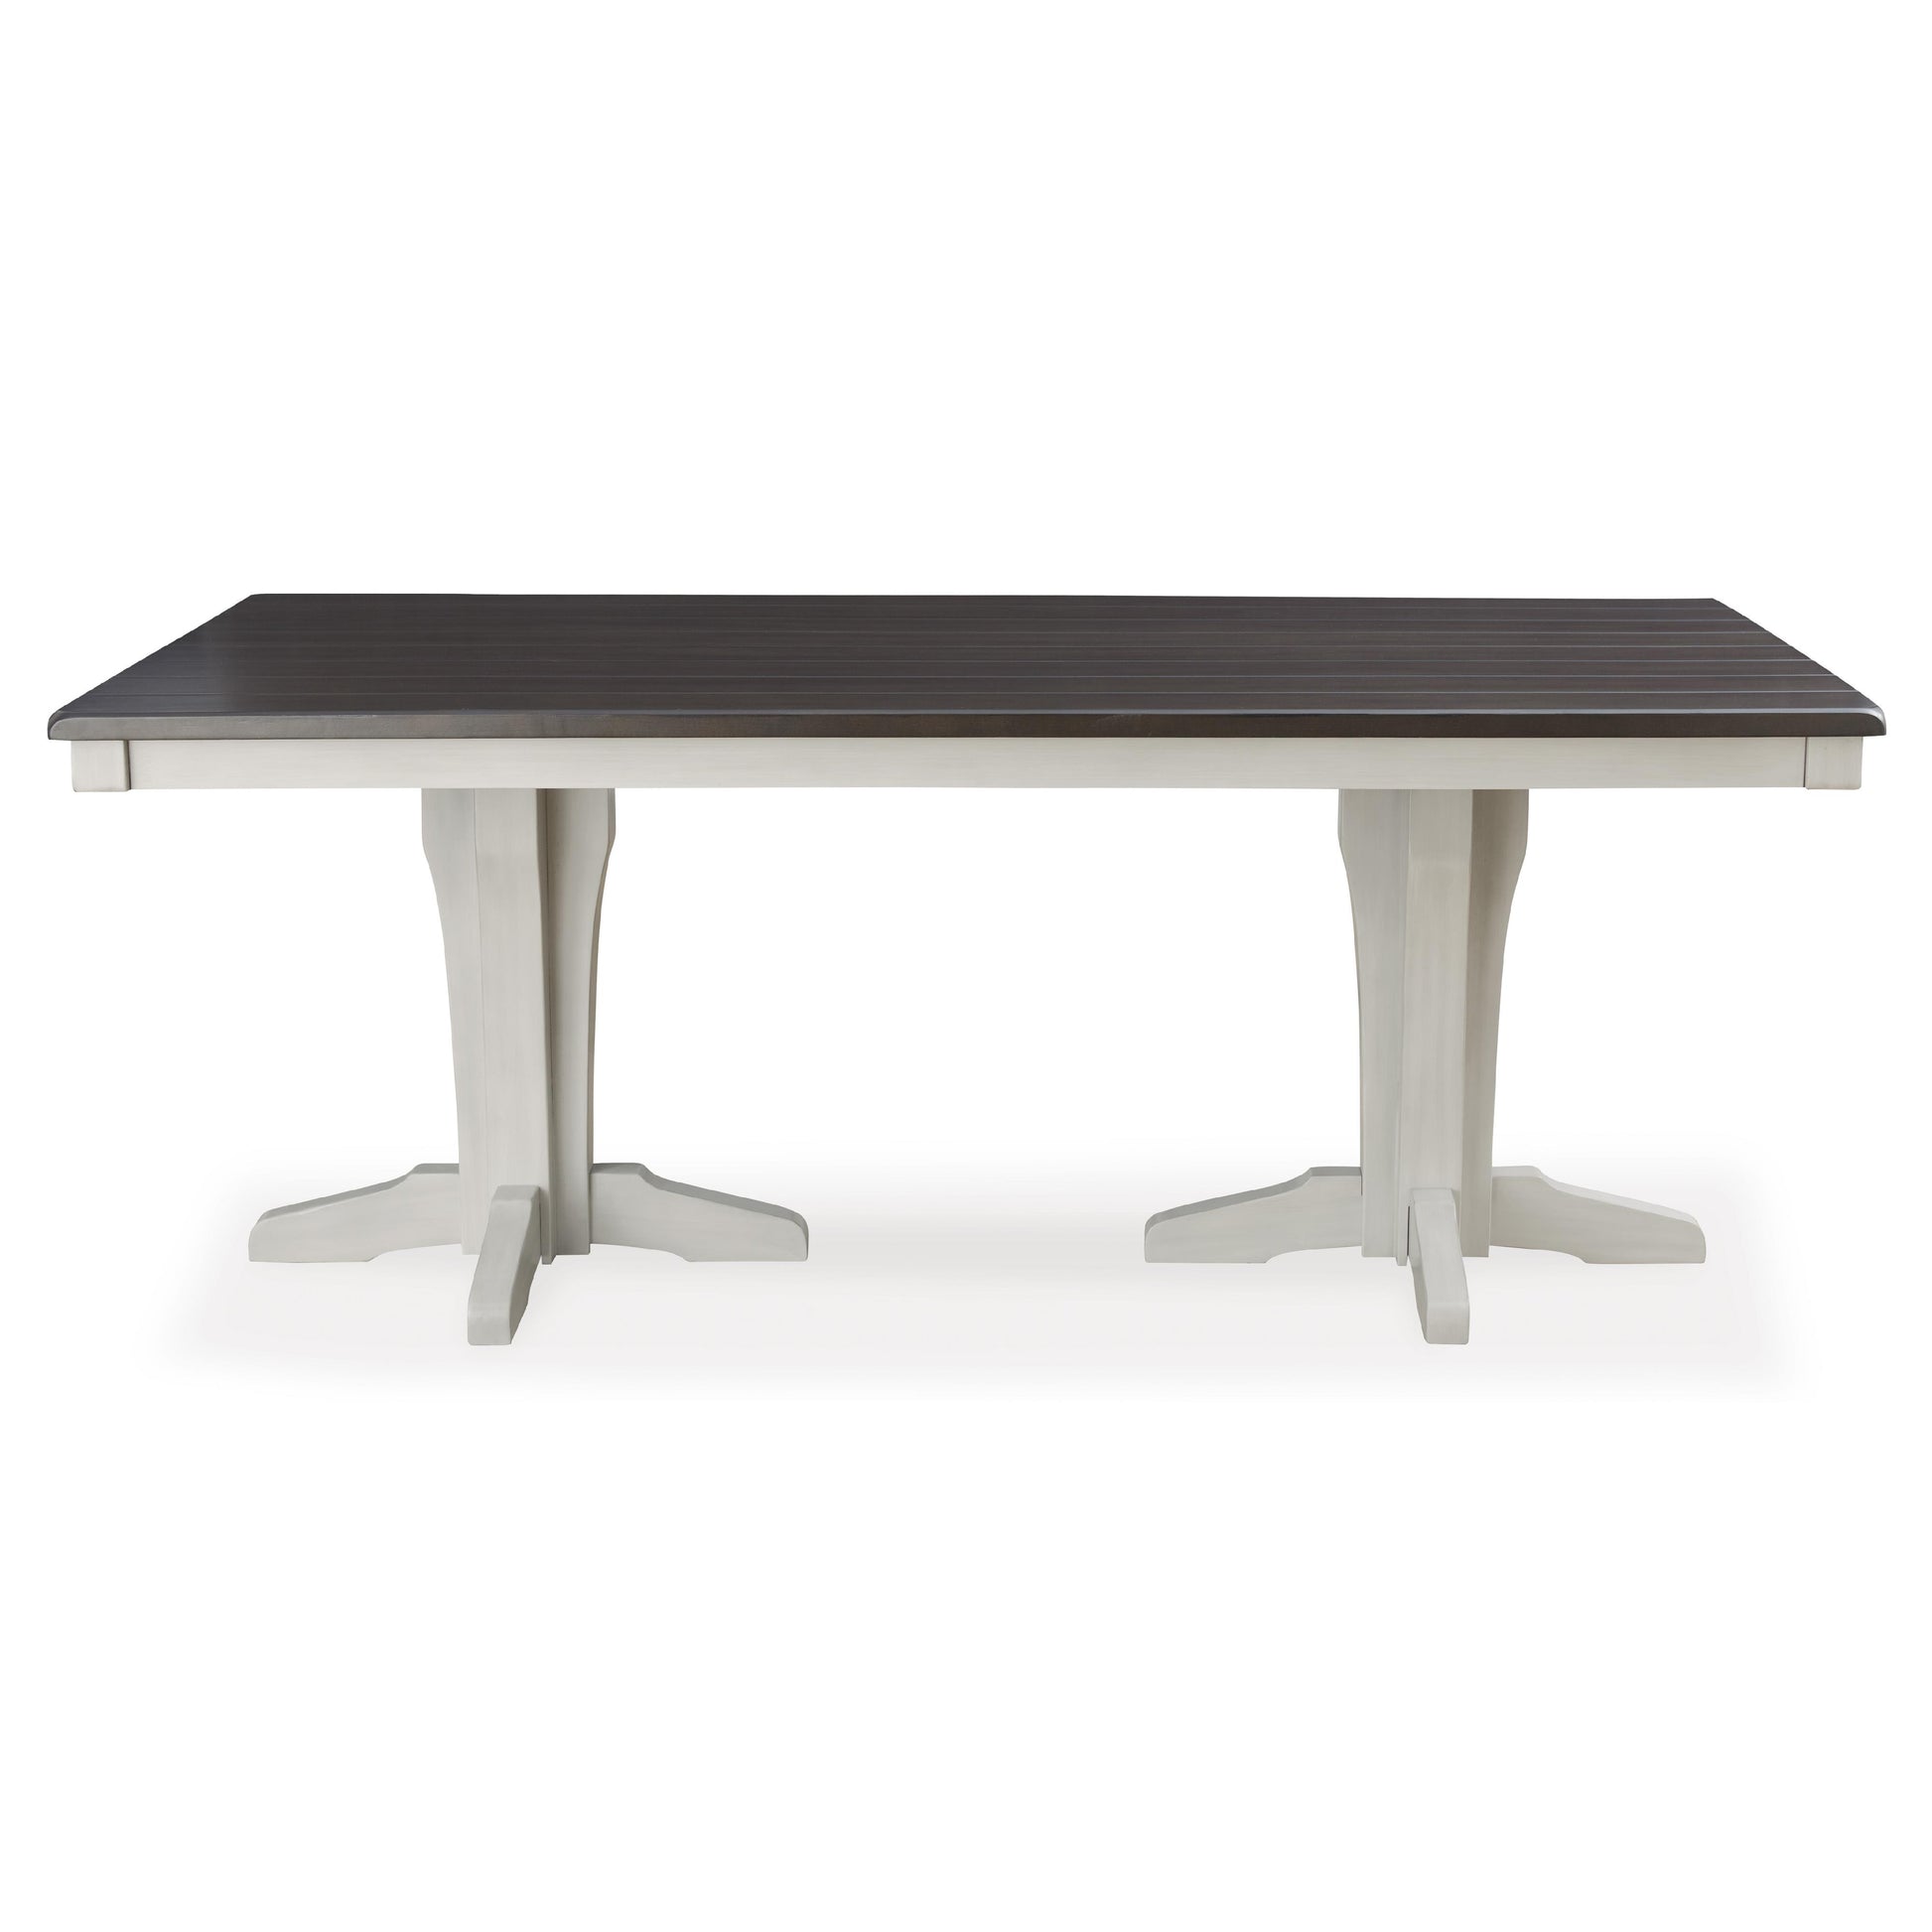 Signature Design by Ashley Darborn Dining Table D796-25B/D796-25T IMAGE 2